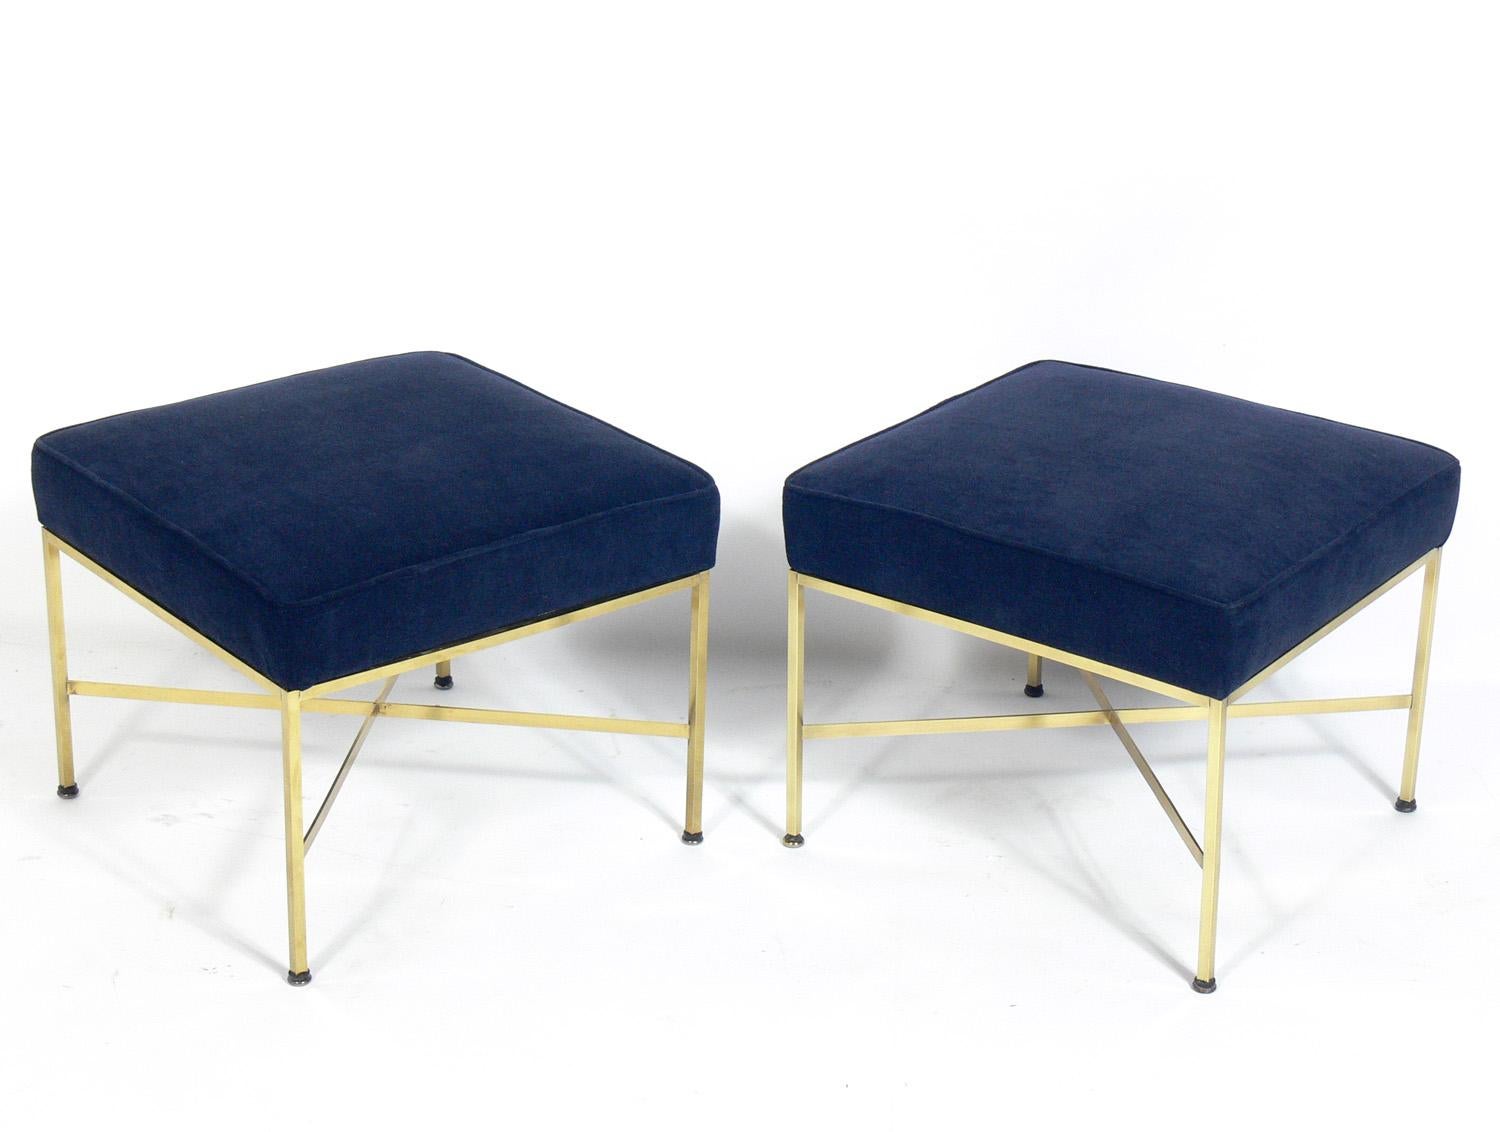 Pair of modern brass X stools, designed by Paul McCobb, American, circa 1950s. They have been polished and lacquered and reupholstered in a navy color velvet.